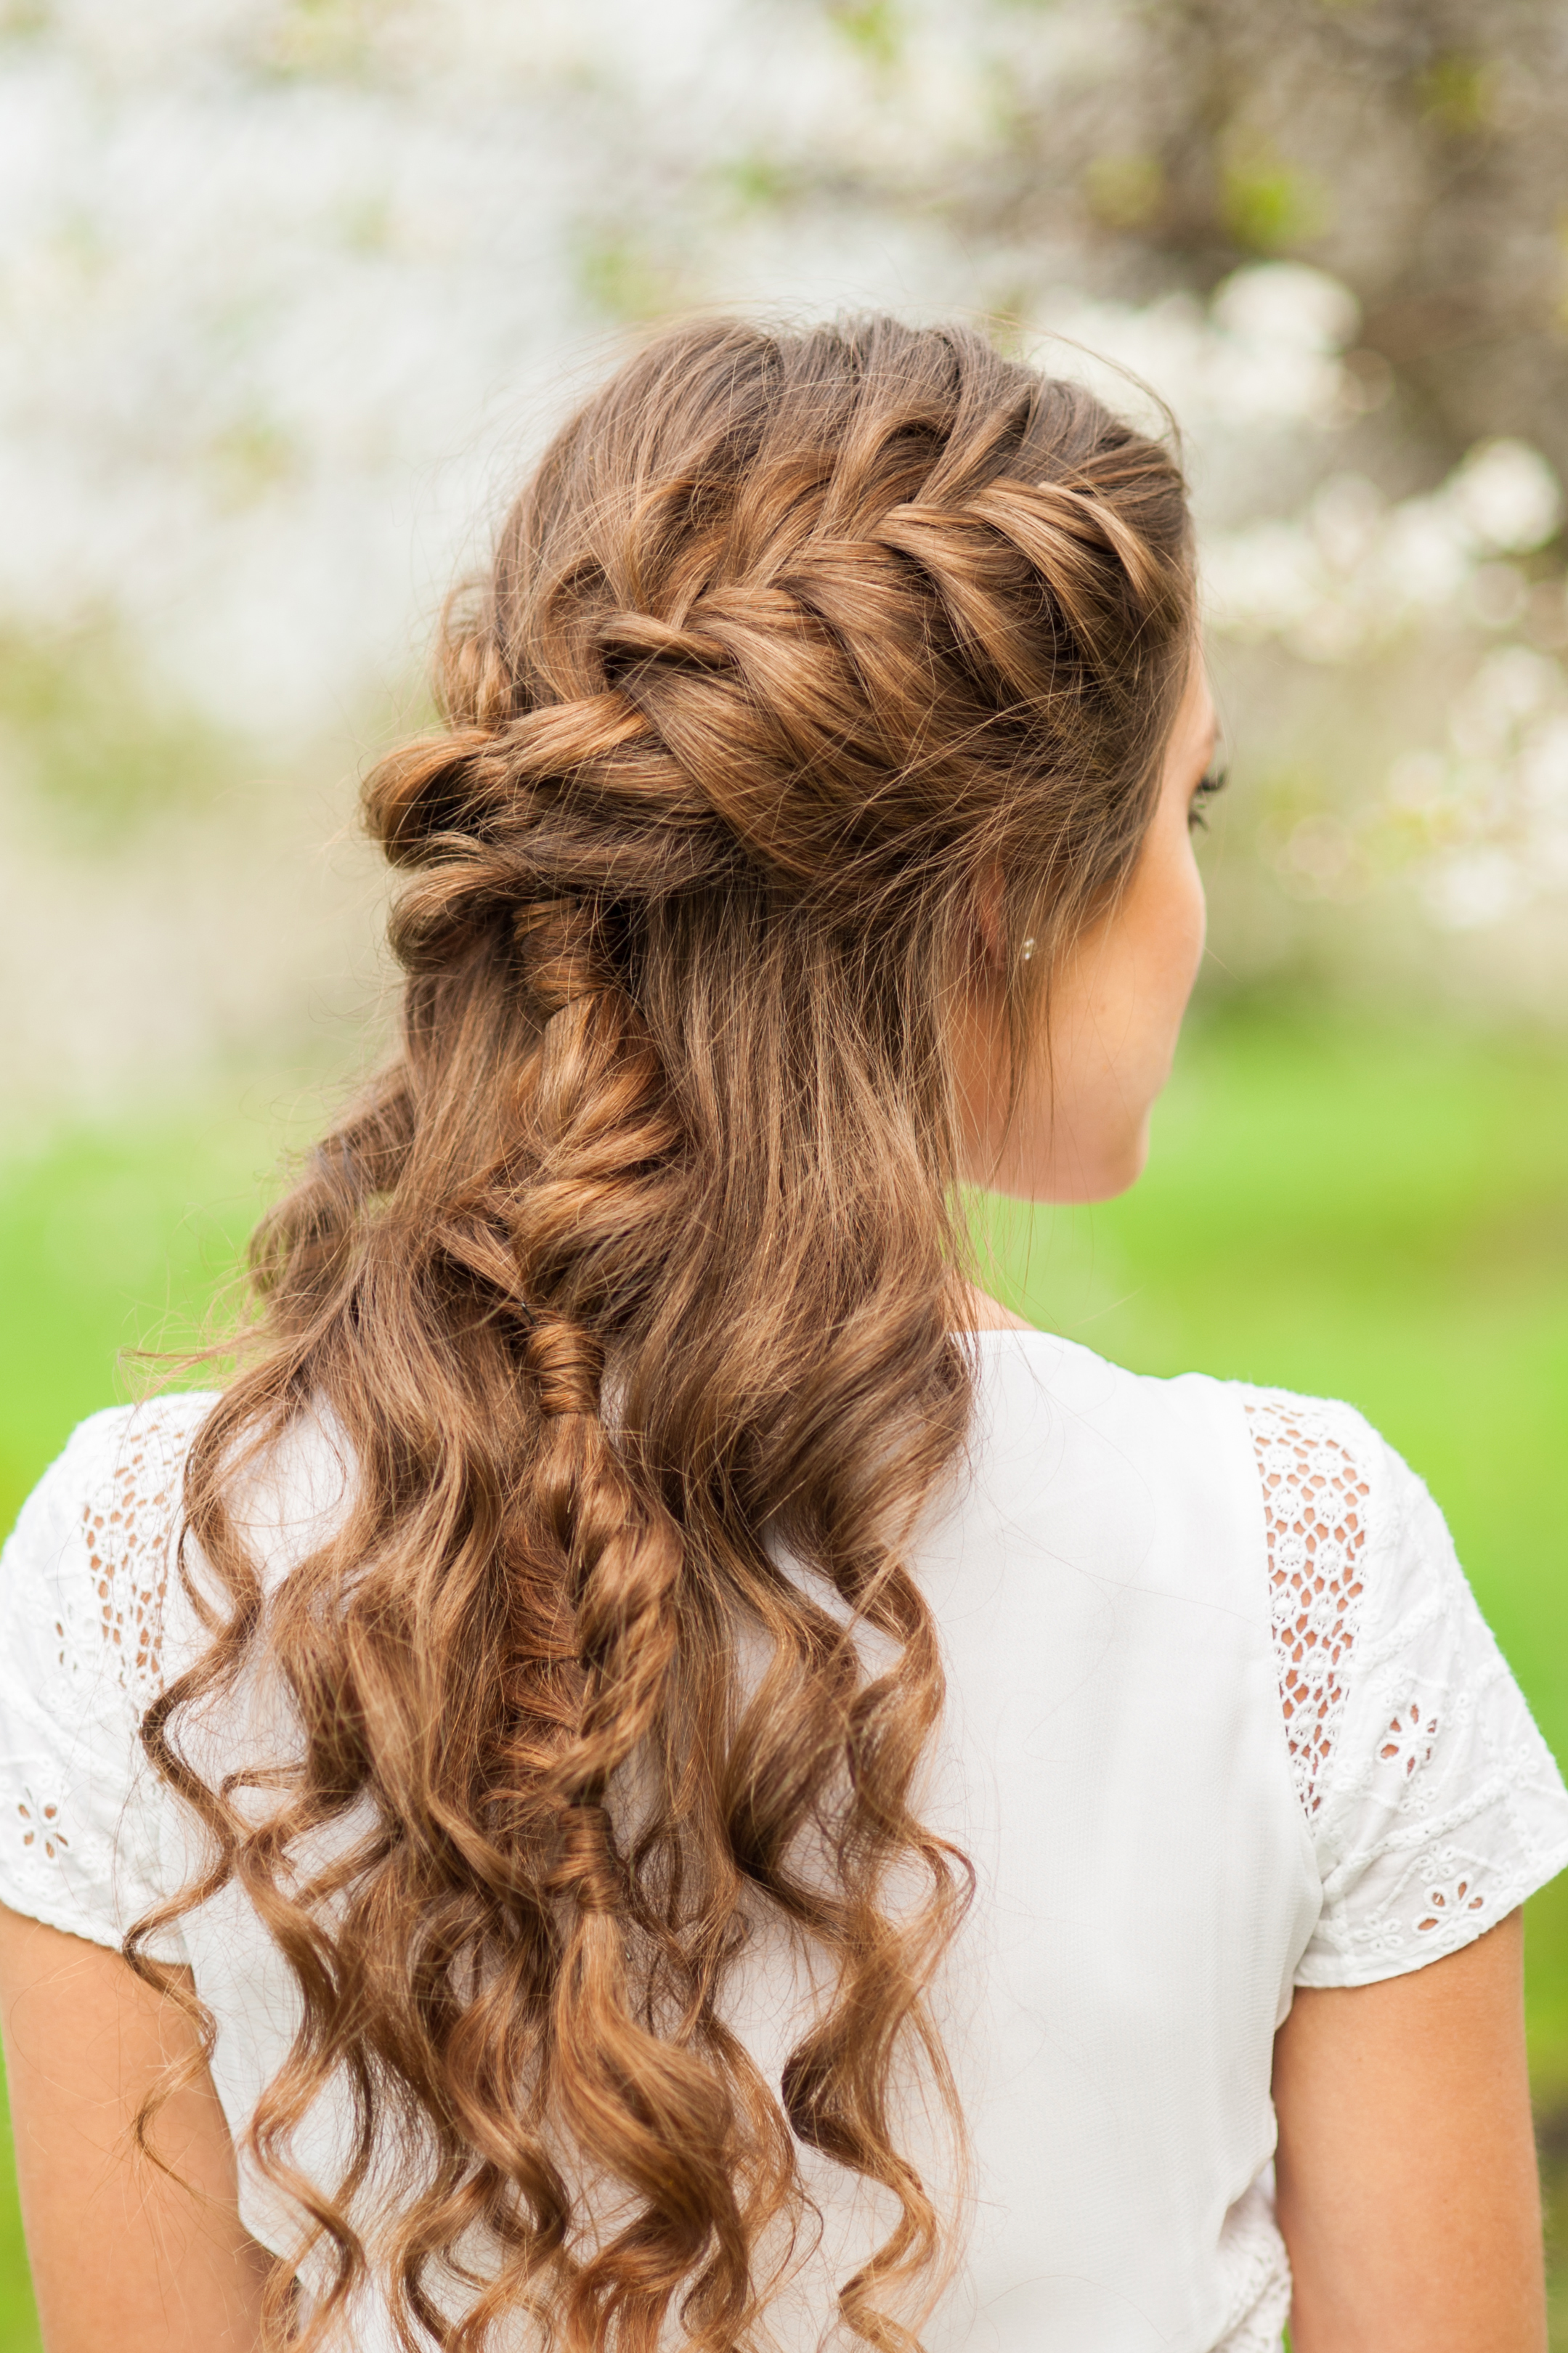 Party Hairstyle - 13 Best Hairstyles That Make You Stand Out